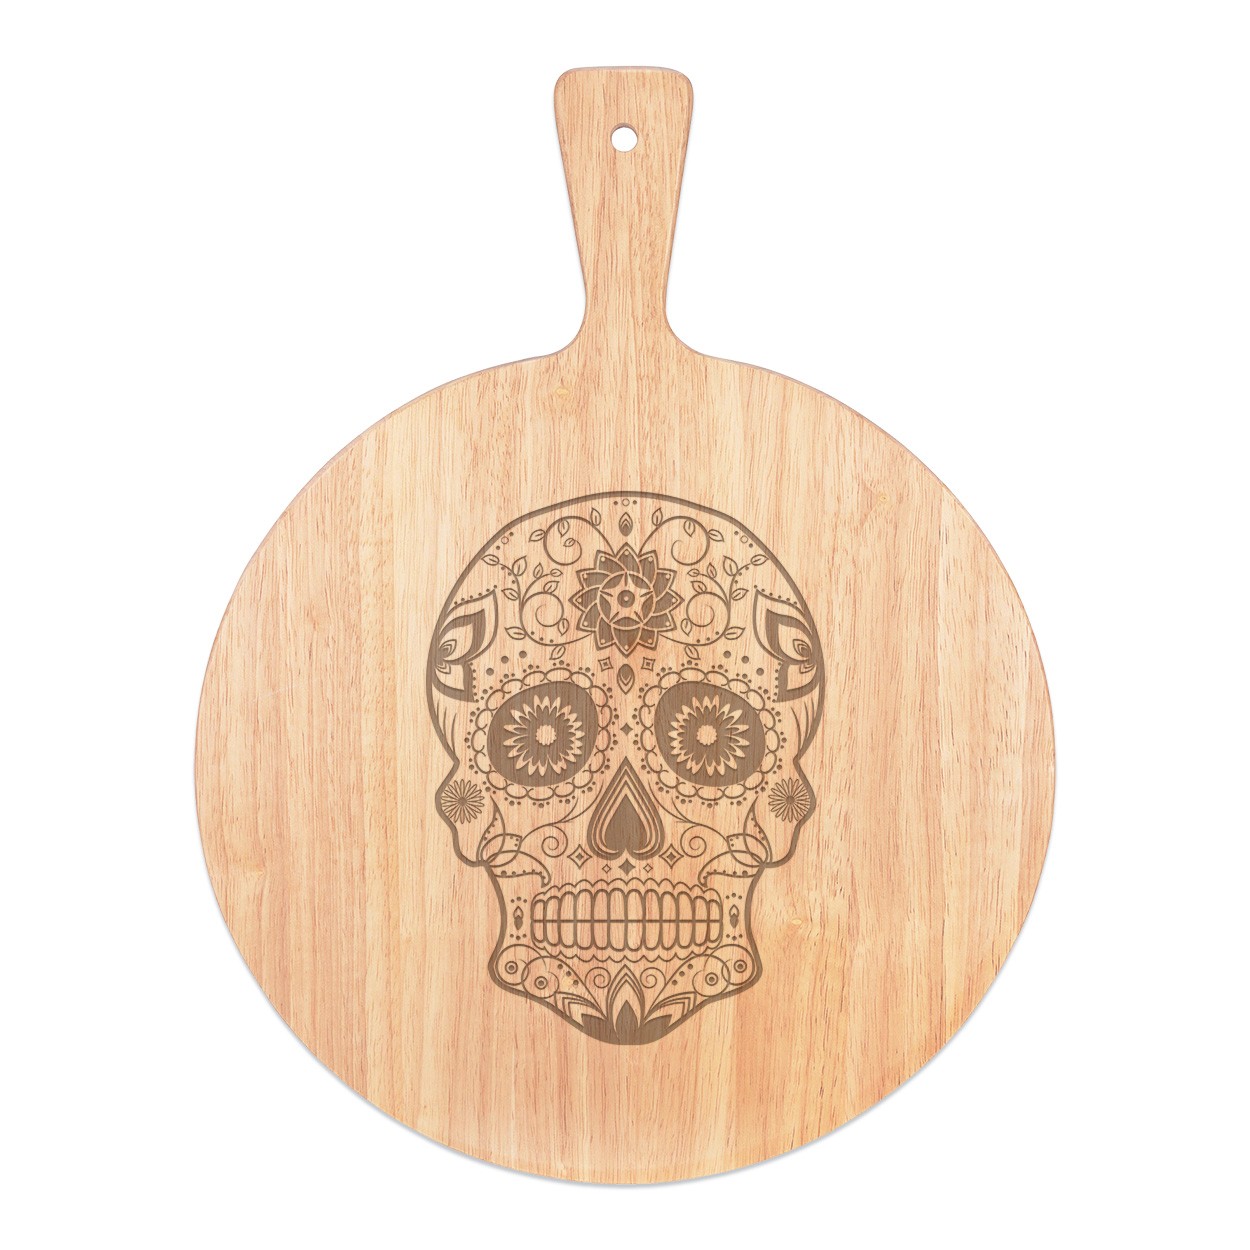 Black Sugar Candy Skull Pizza Board Paddle Serving Tray Handle Round Wooden 45x34cm